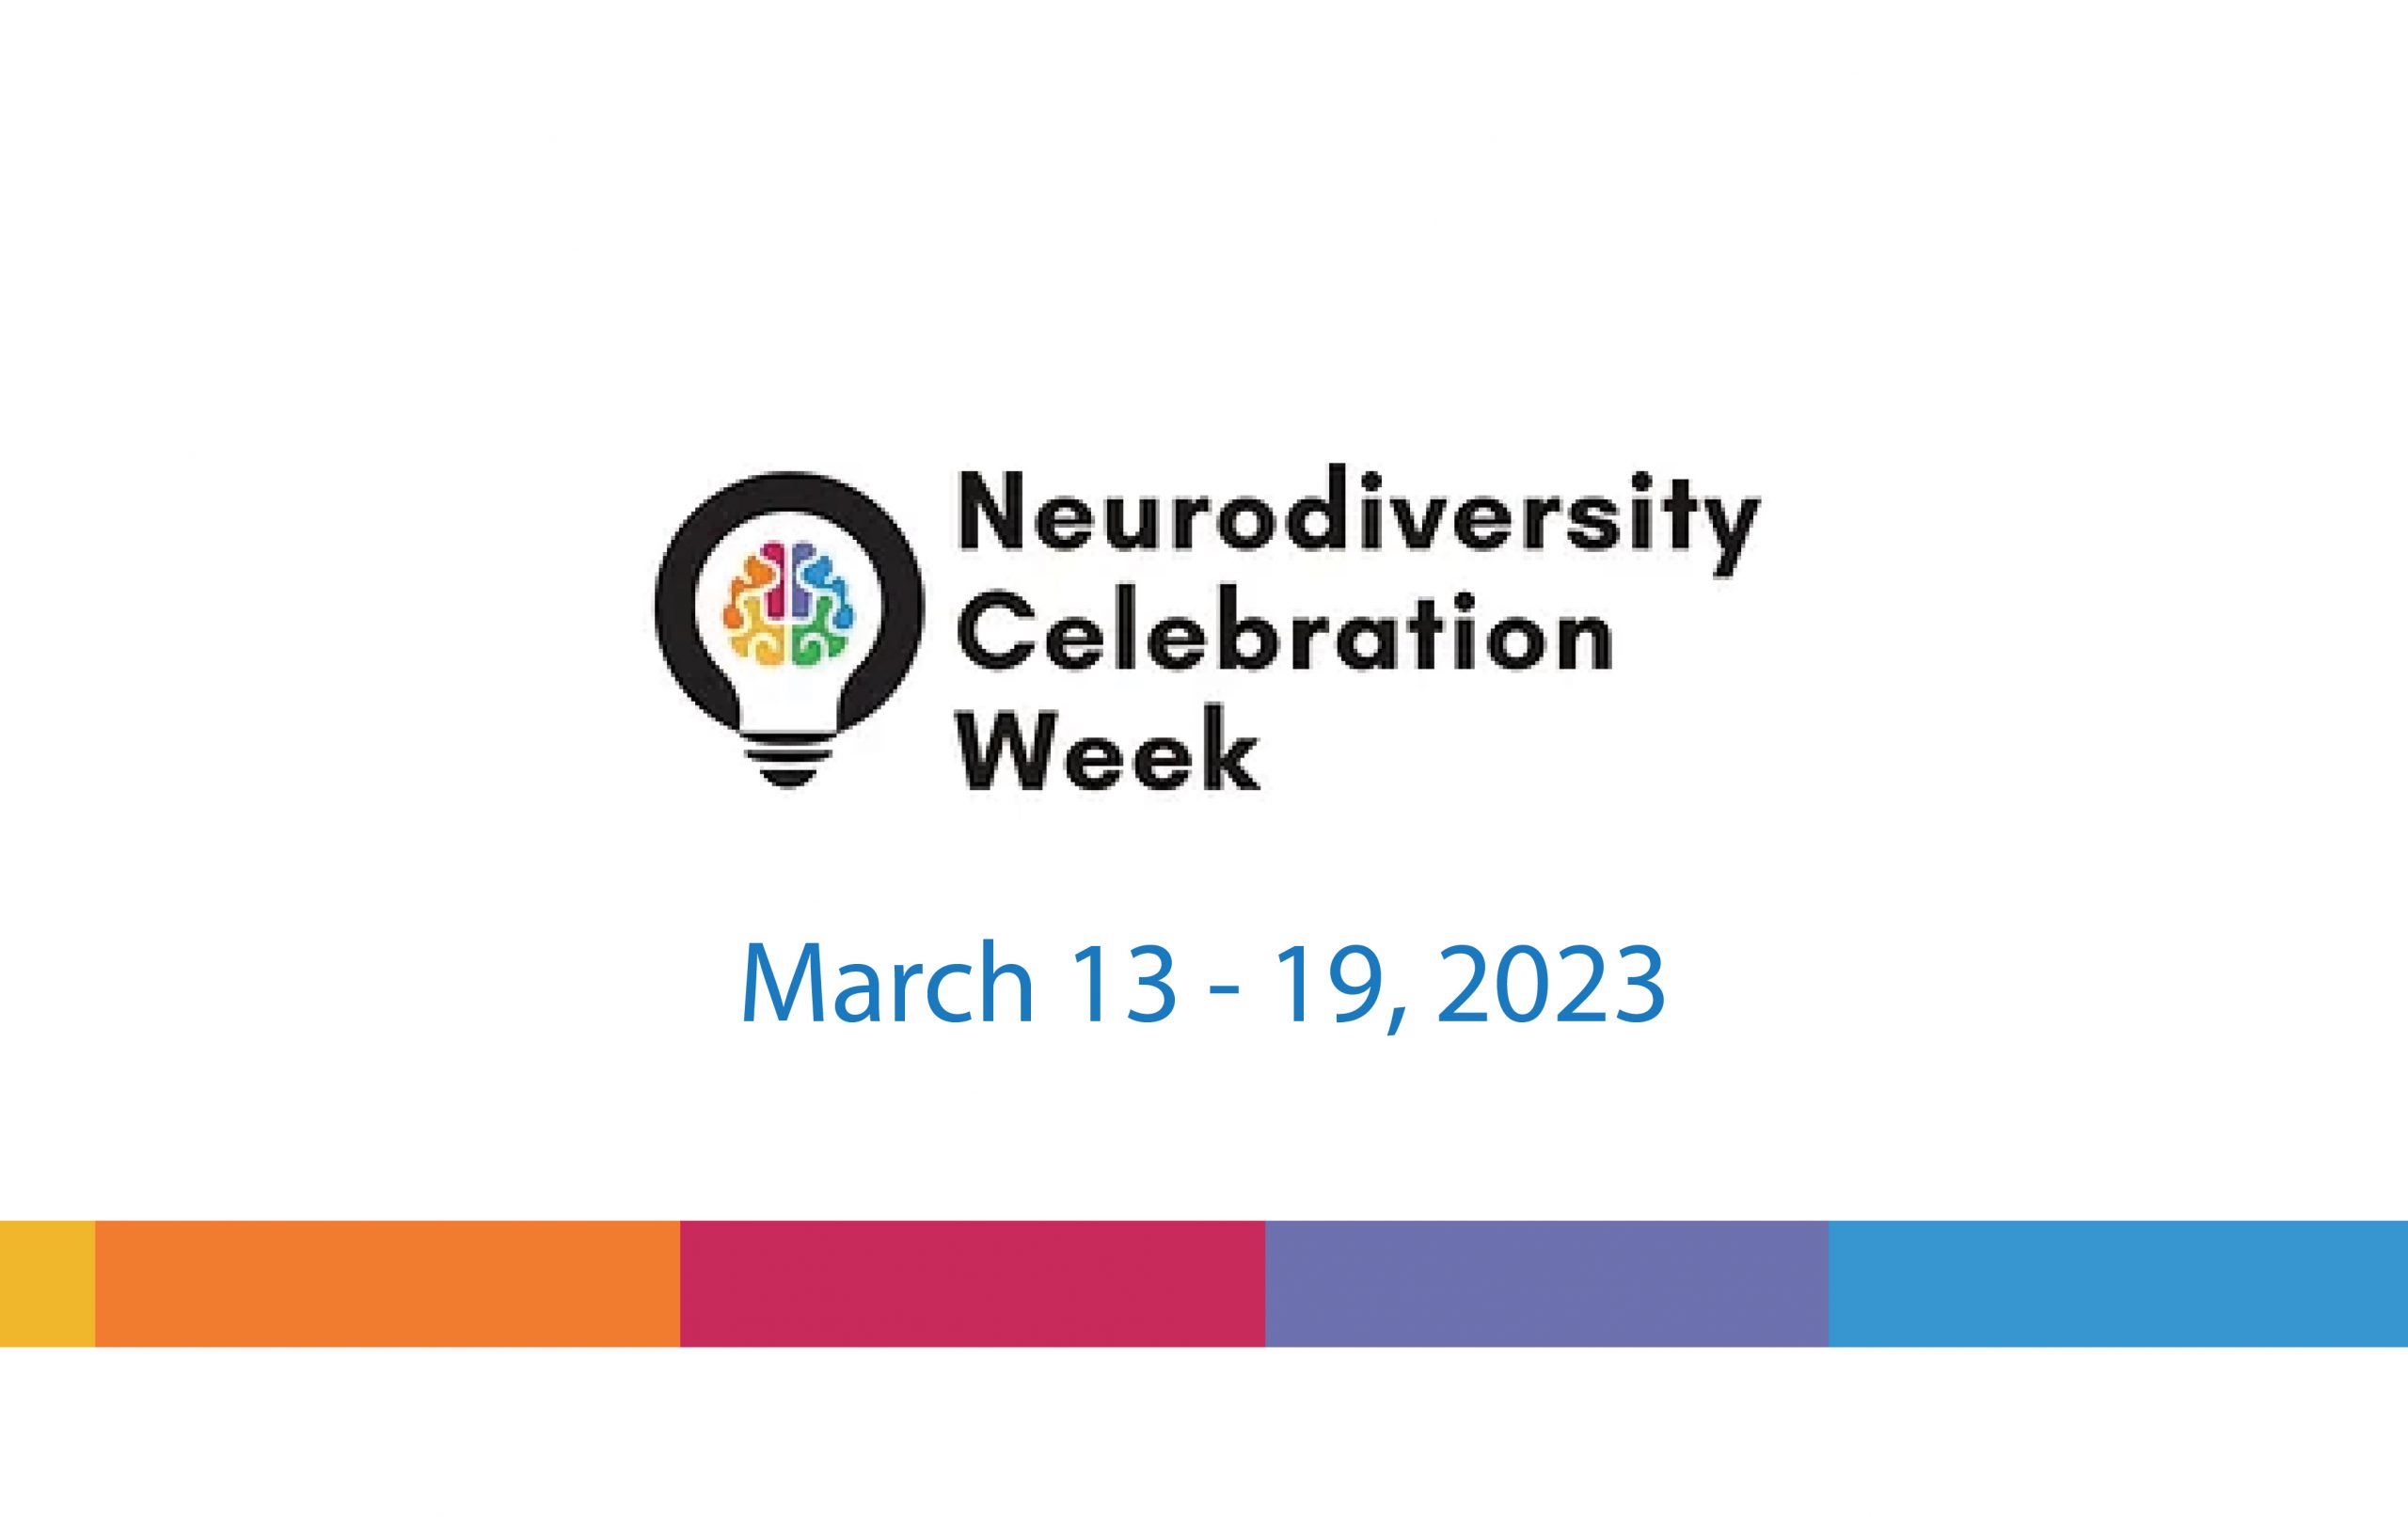 On a white background, in the middle of the image is the Neurodiversity Celebration Week logo. Below that in blue, the text reads, "March 13-19, 2023".